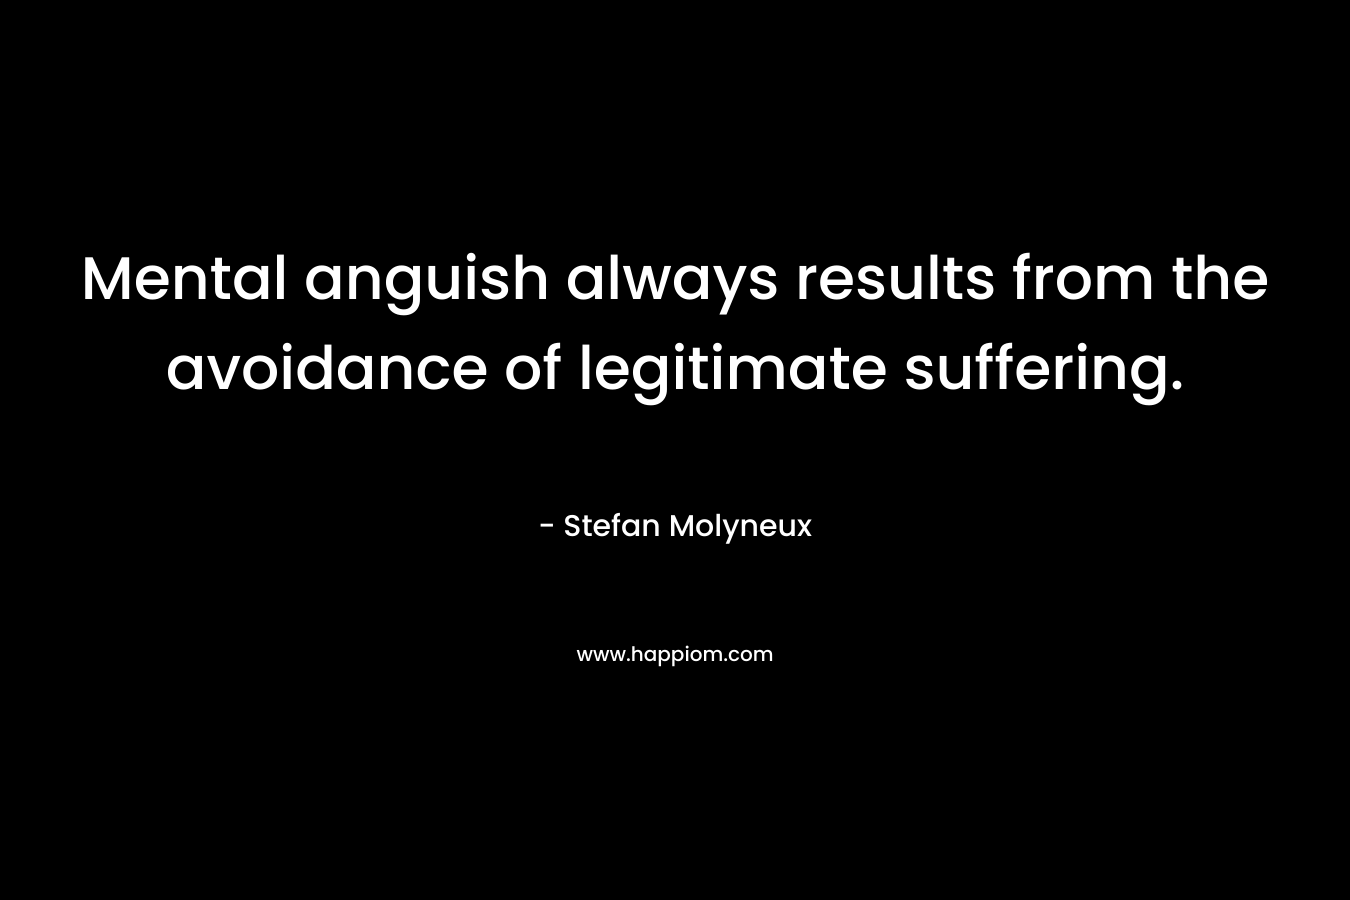 Mental anguish always results from the avoidance of legitimate suffering.